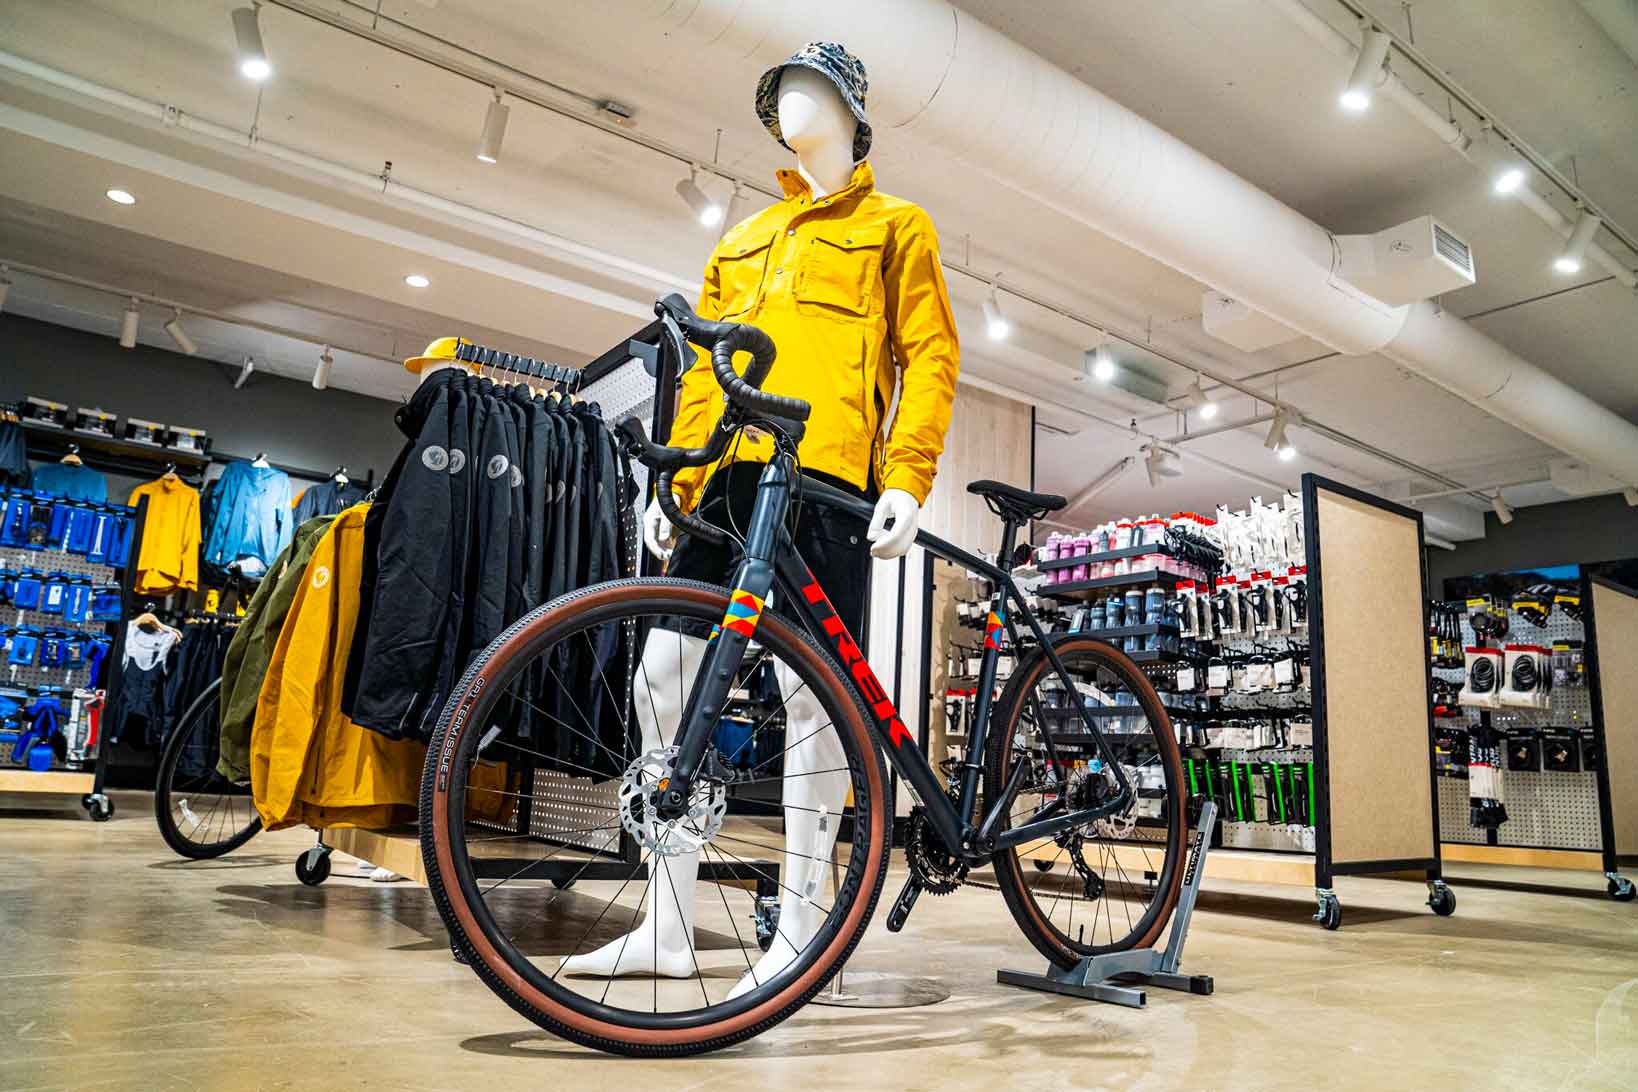 Mannequin along with bicycle on display inside store 